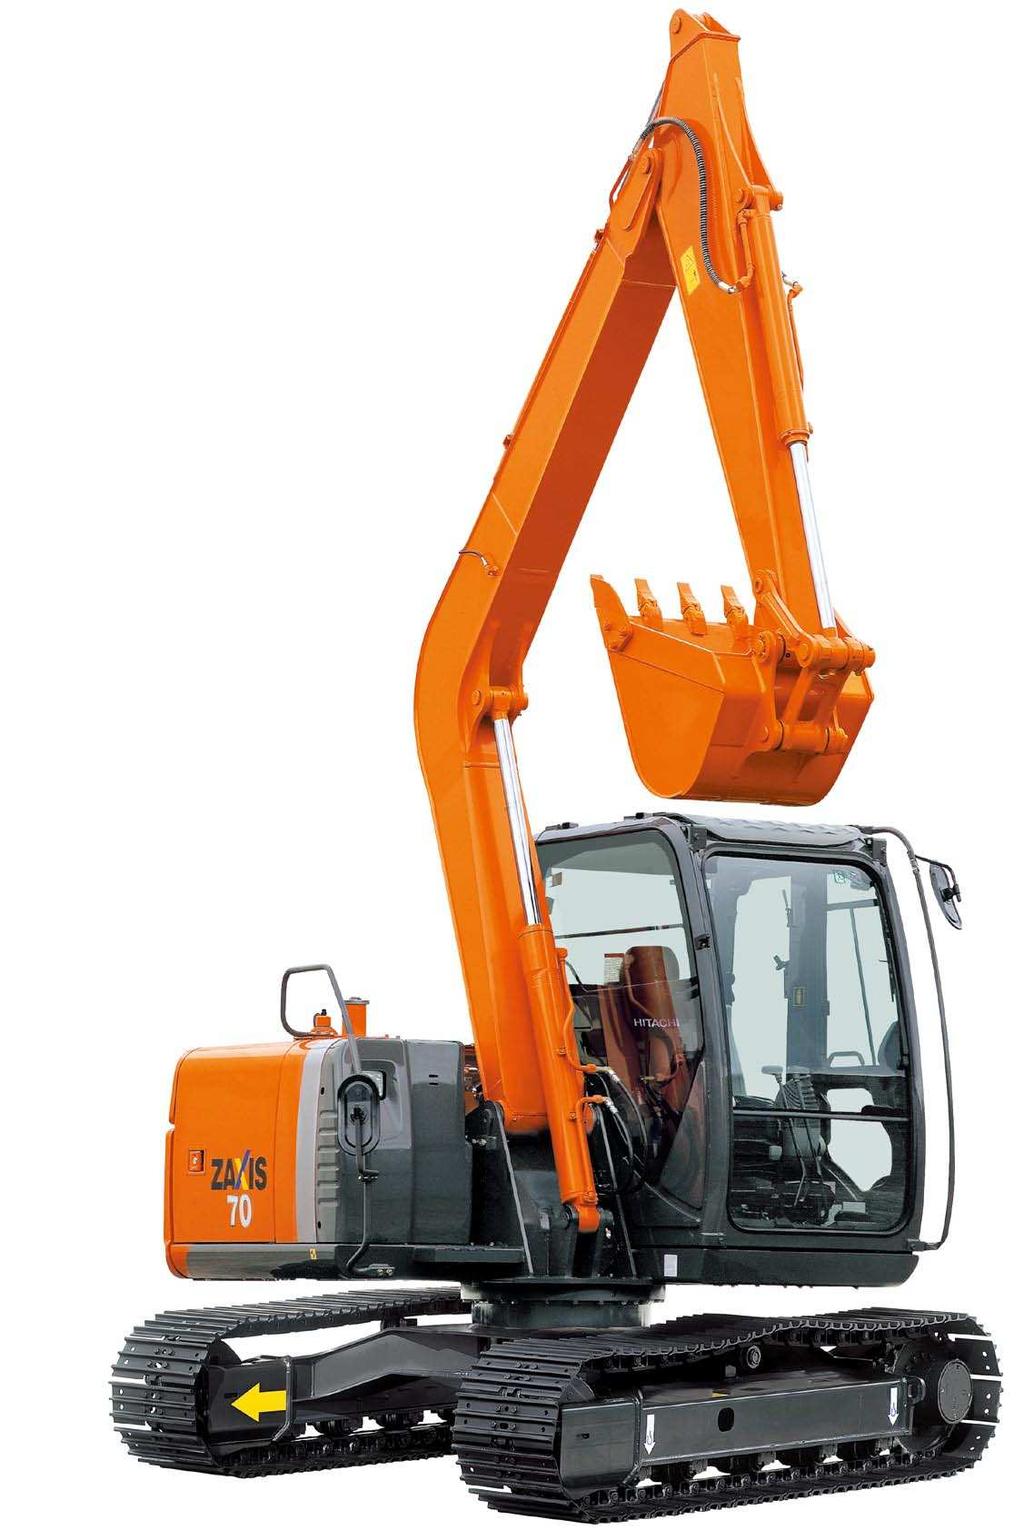 ZAXIS- series HYDRAULIC EXCAVATOR Model Code : ZX70- ZX70LC- Engine Rated Power : 40.5 kw (54. HP) EEC 80 1 269 (without FAN) 9.4 kw (52.